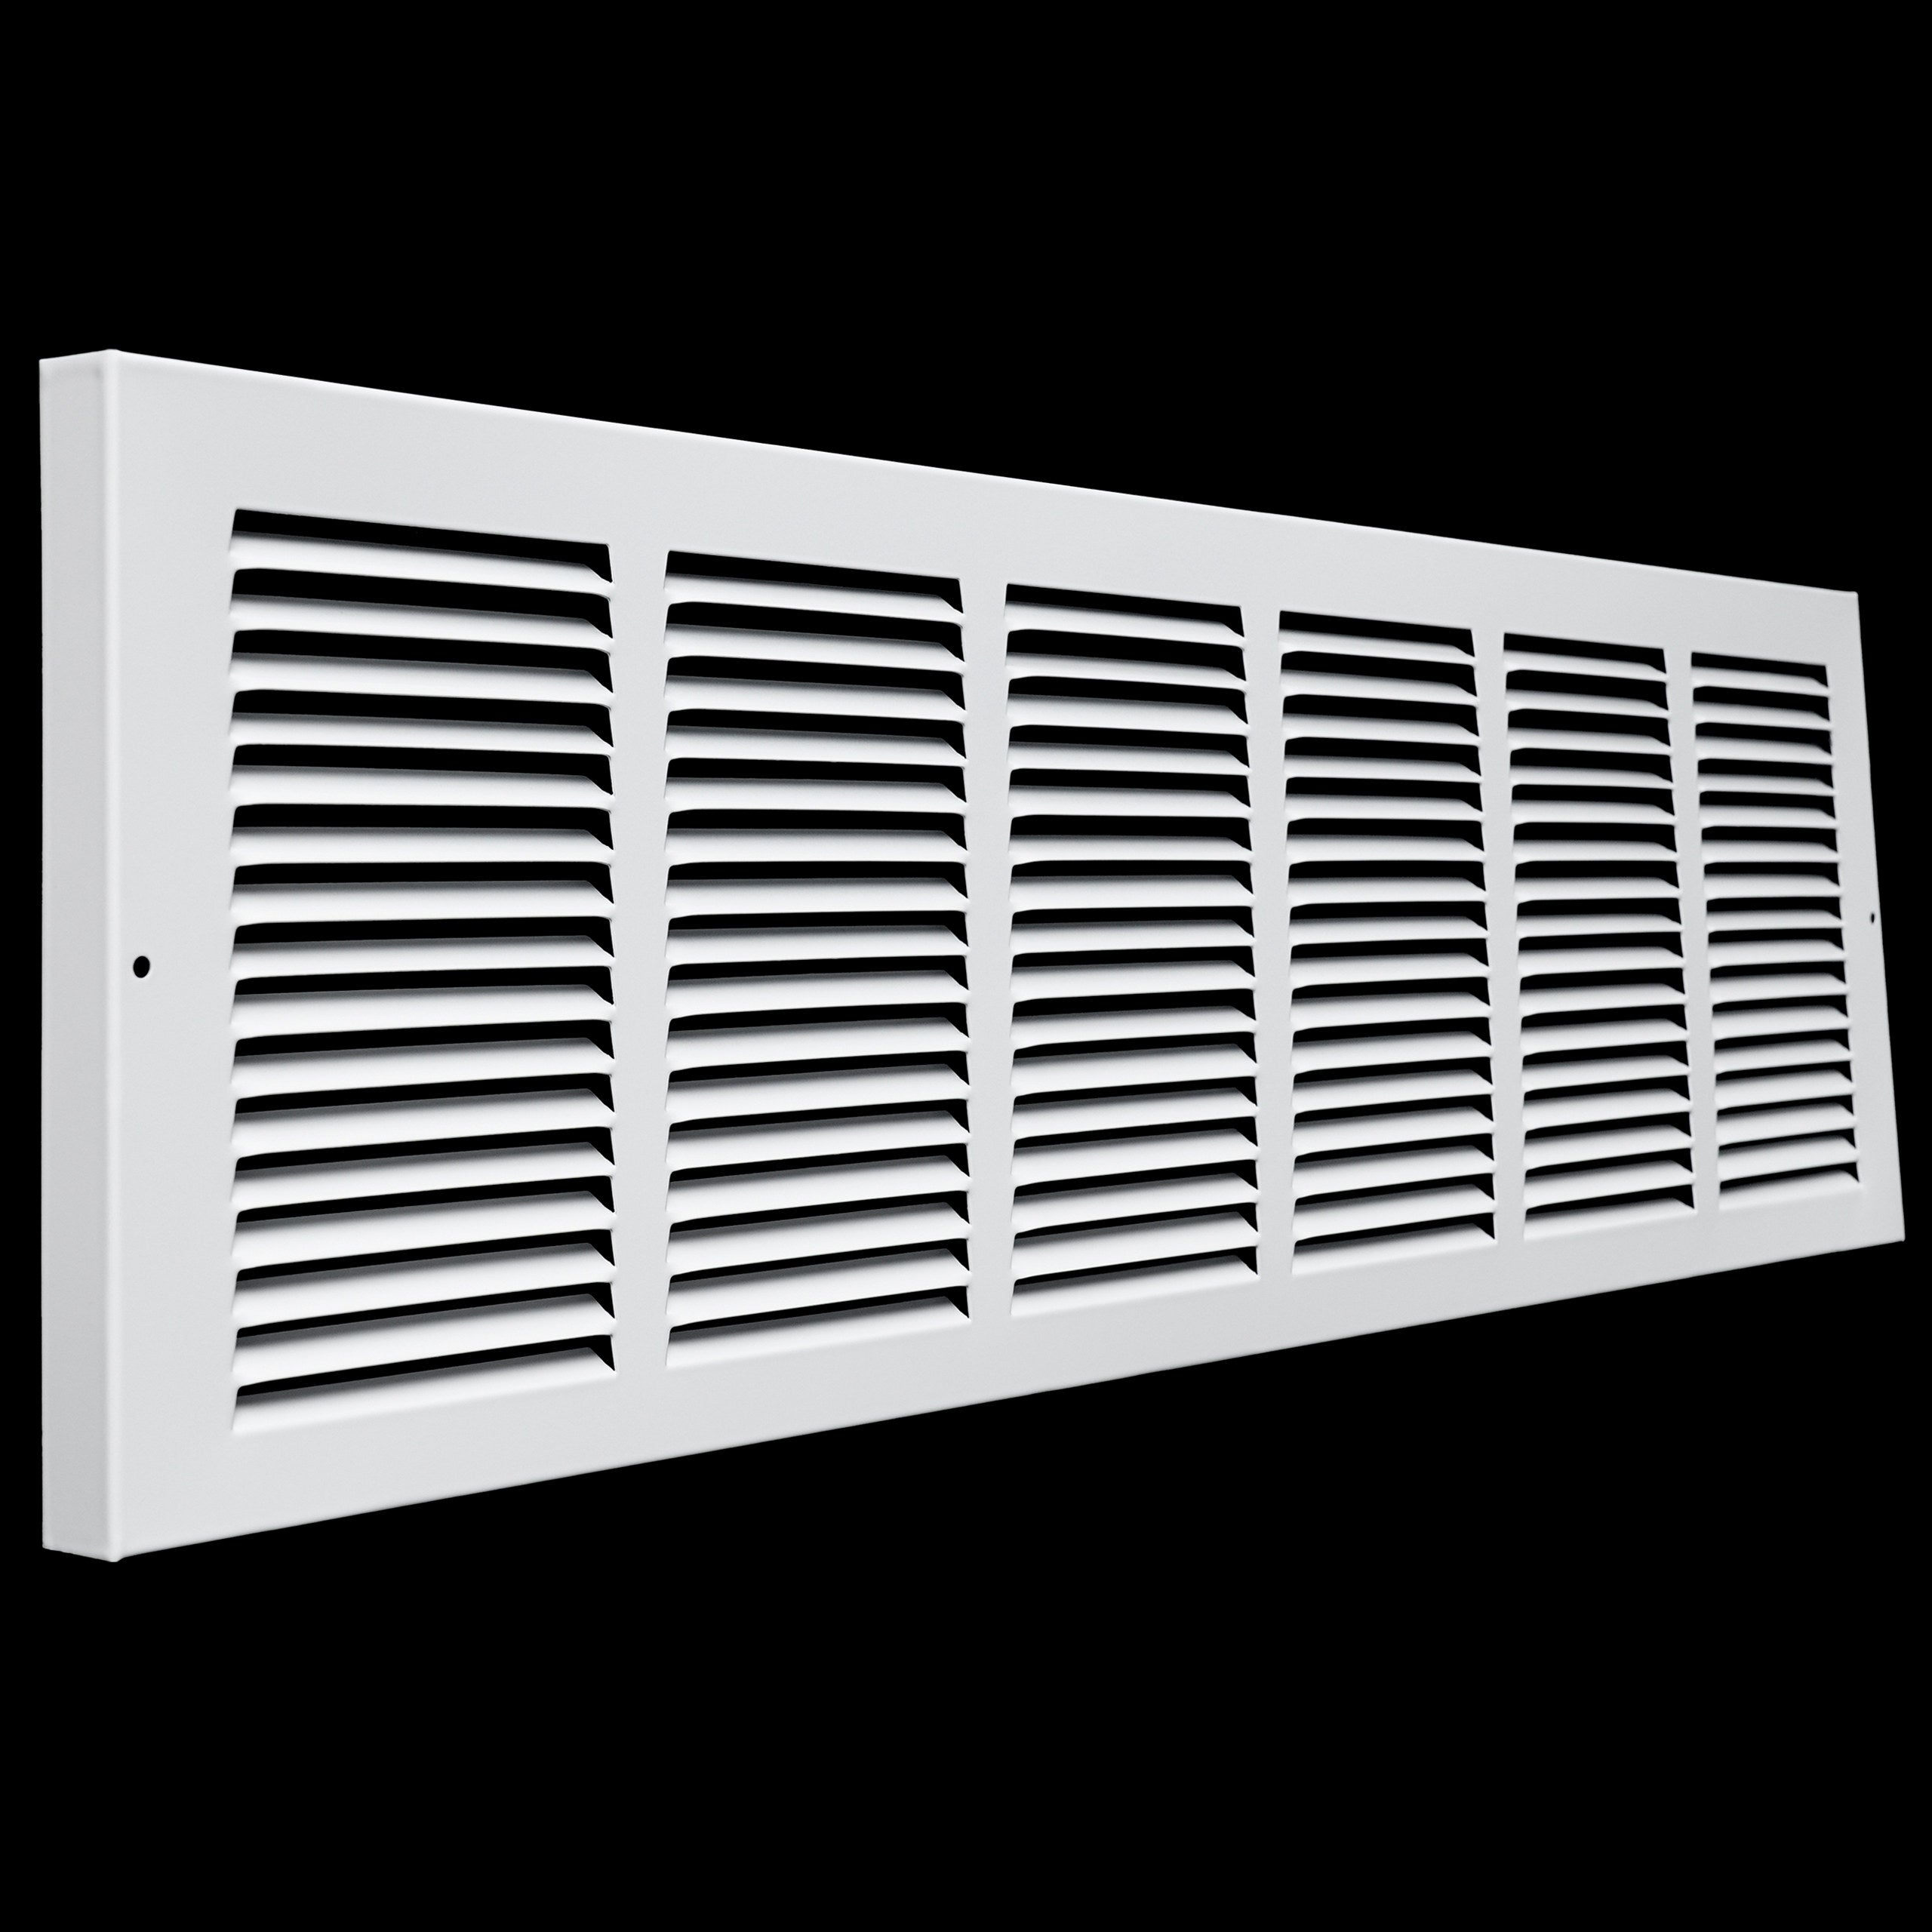 airgrilles 30"w x 8"h baseboard return air grille vent cover grill 7/8" margin turnback to fit baseboard white outer dimensions: 31.75"w x 9.75"h for 30x8 duct opening hnd-bra-wh-30x8  1